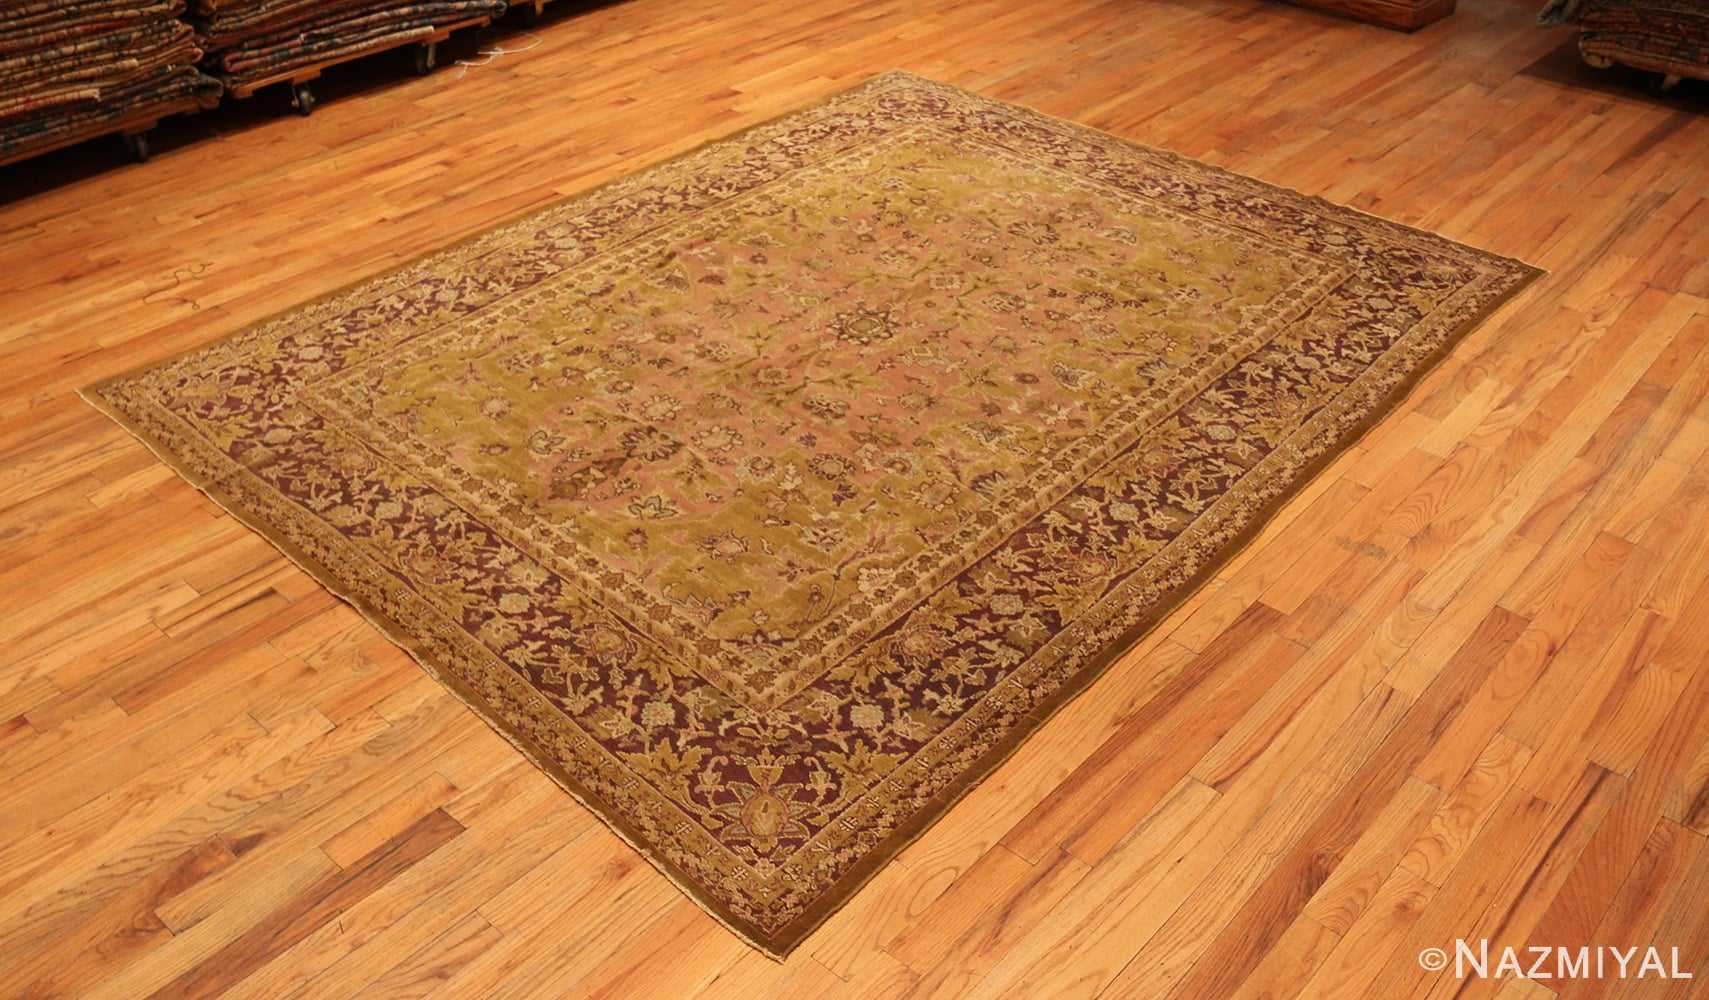 Side View Of Polonaise Design Late 19th Century Antique Indian Agra Rug 48840 by Nazmiyal NYC